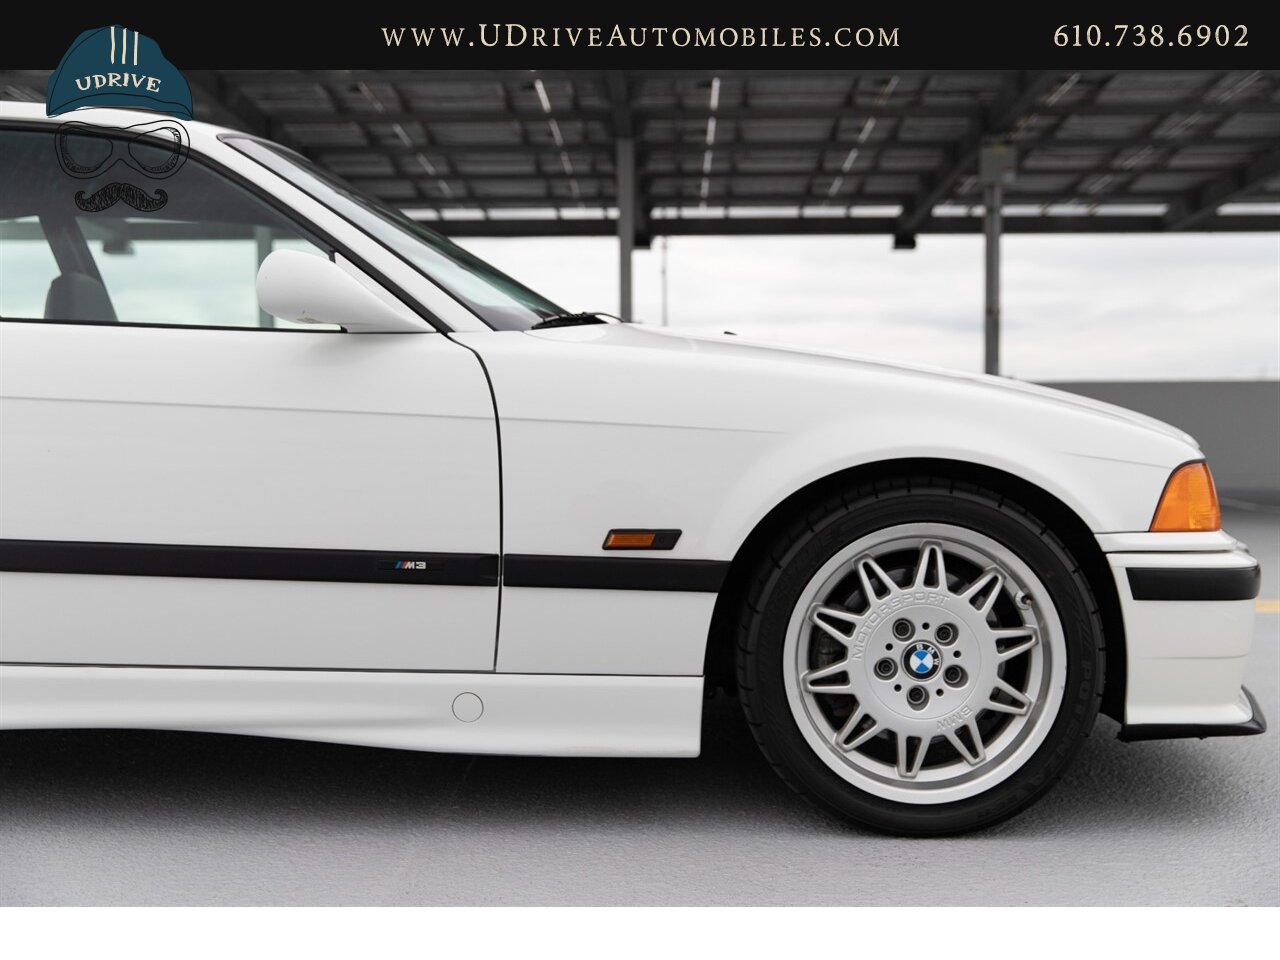 1995 BMW M3 E36 Alpine White over Black Vader Seats  5 Speed - Photo 14 - West Chester, PA 19382